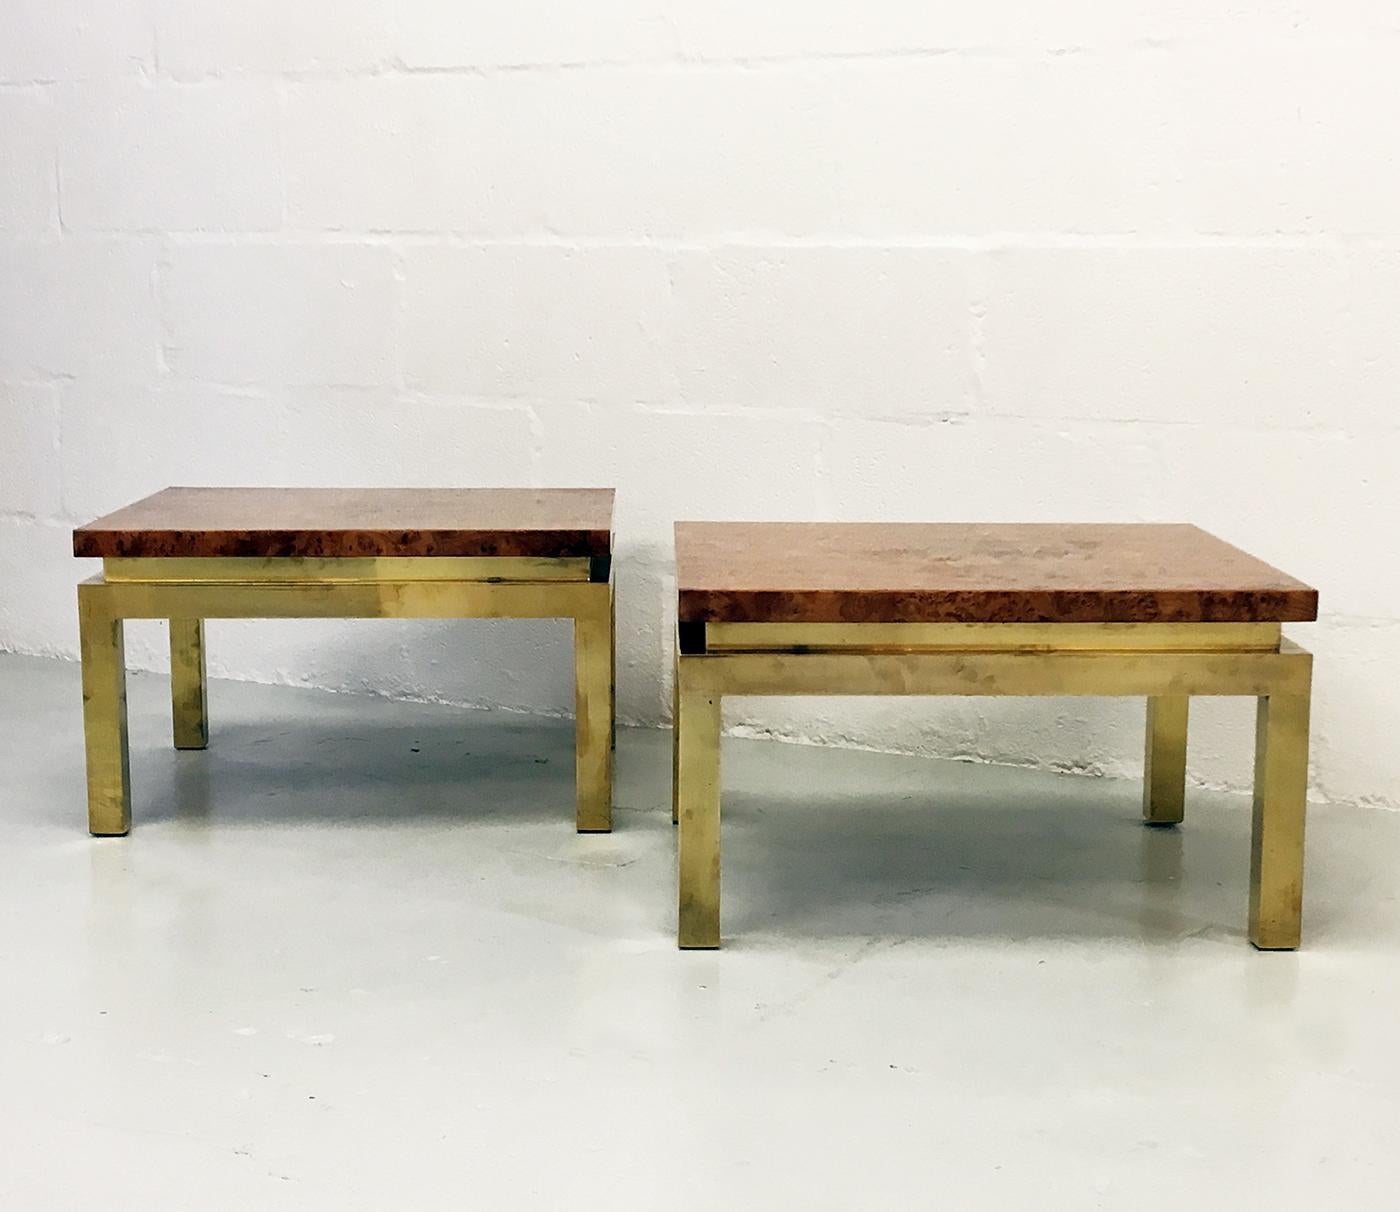 Super stylish pair of 1970s French decorative burr walnut and brass side tables designed by Guy Lefevre for Maison Jansen, Paris.
They are in good original vintage condition and display very well. The burr walnut tops are heavily lacquered, which